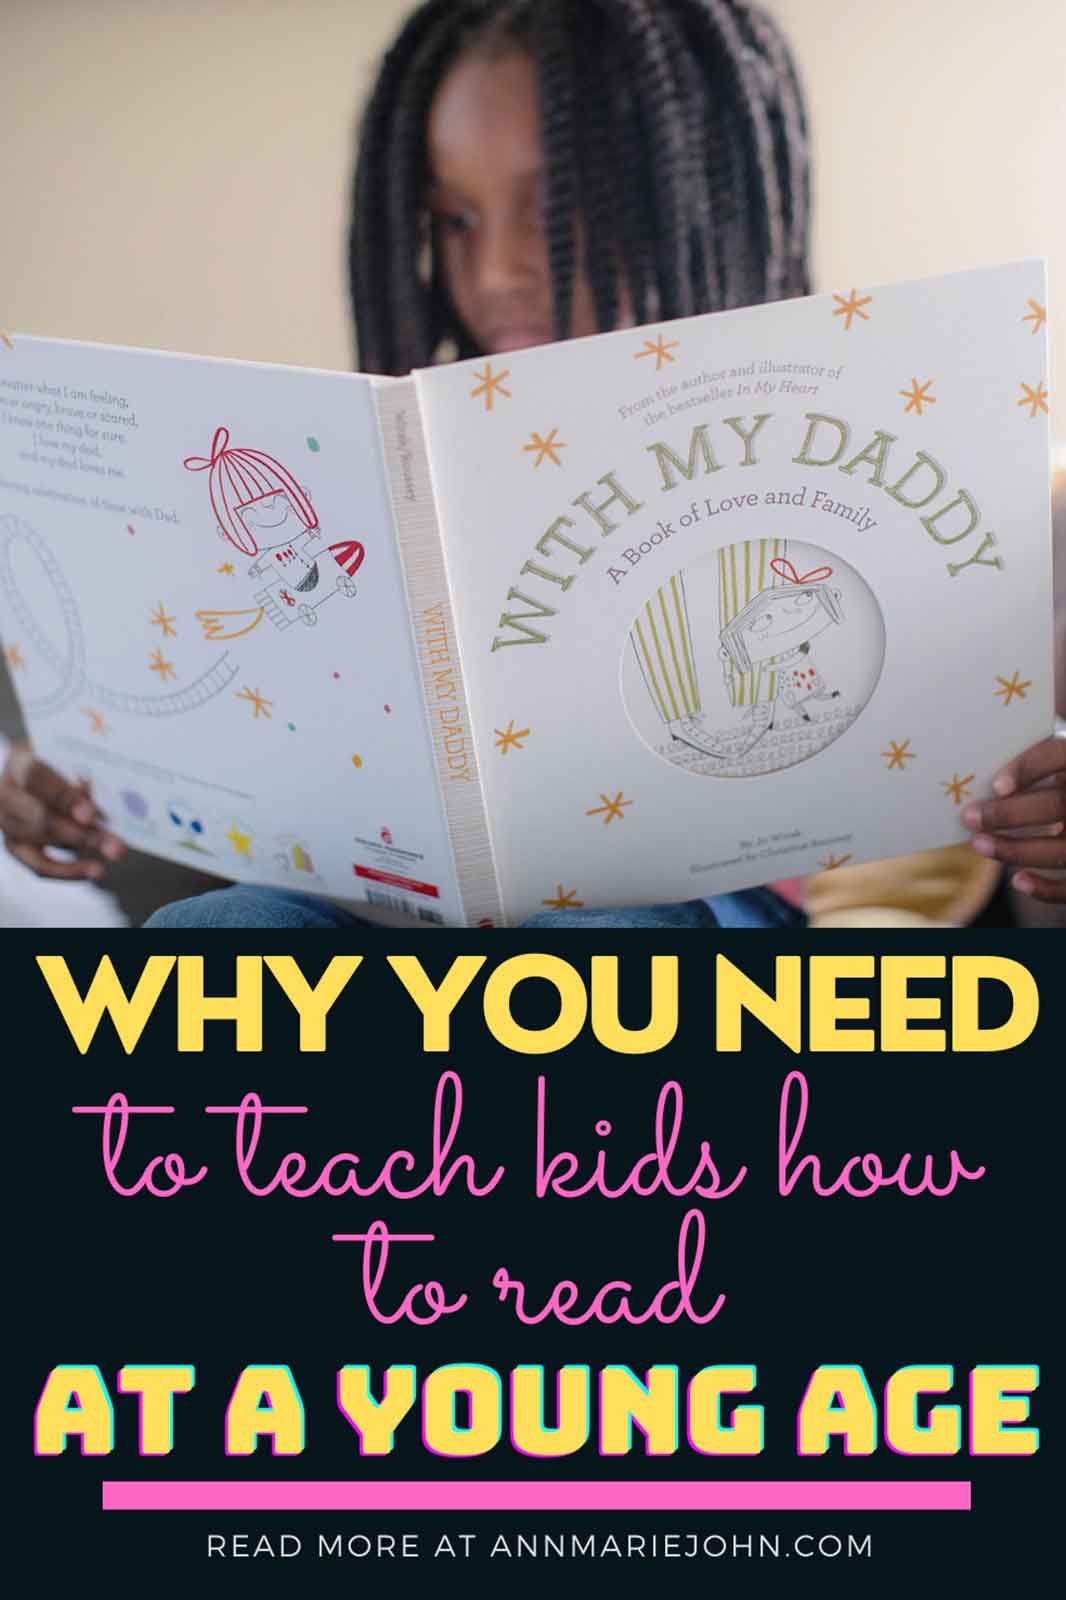 Why You Need to Teach Your Kids How to Read at A Young Age